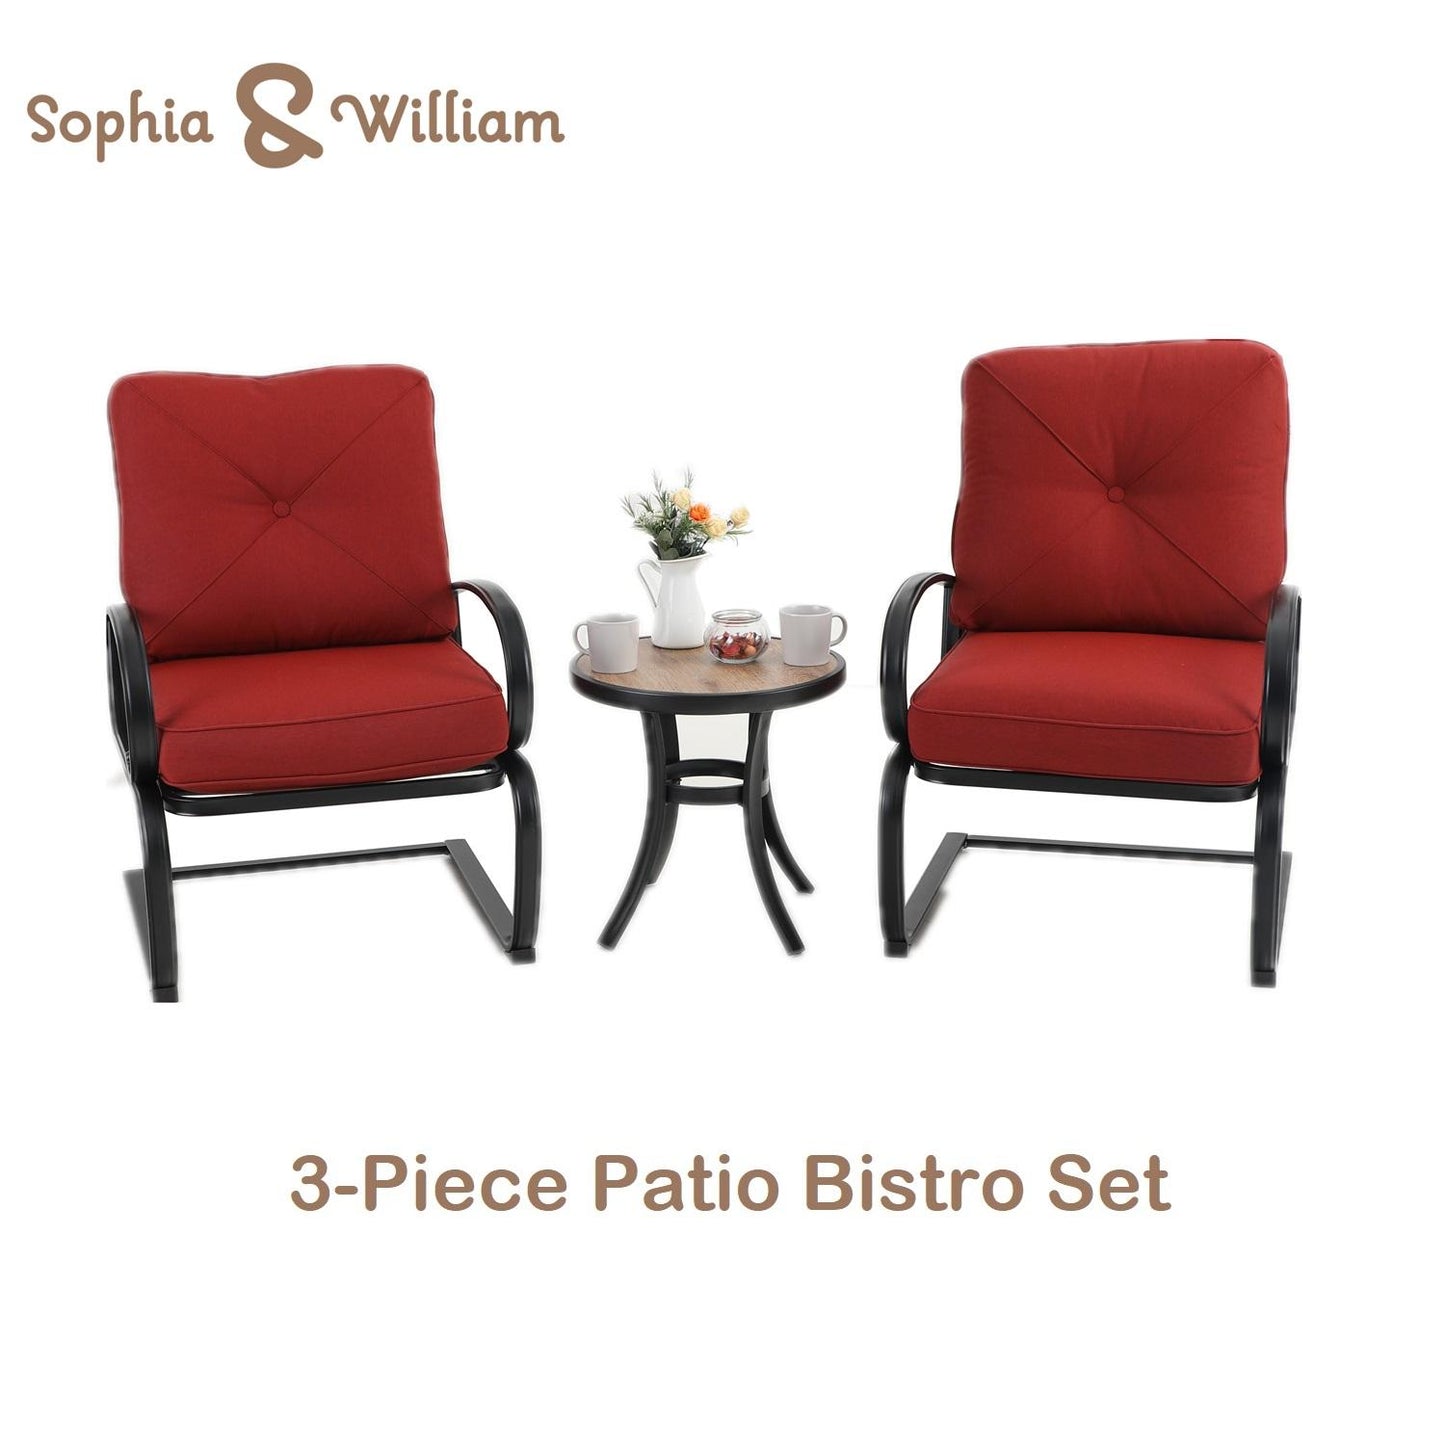 Sophia&William 3-Piece Outdoor Bistro Set Patio C-Spring Chairs and Table Set,Red